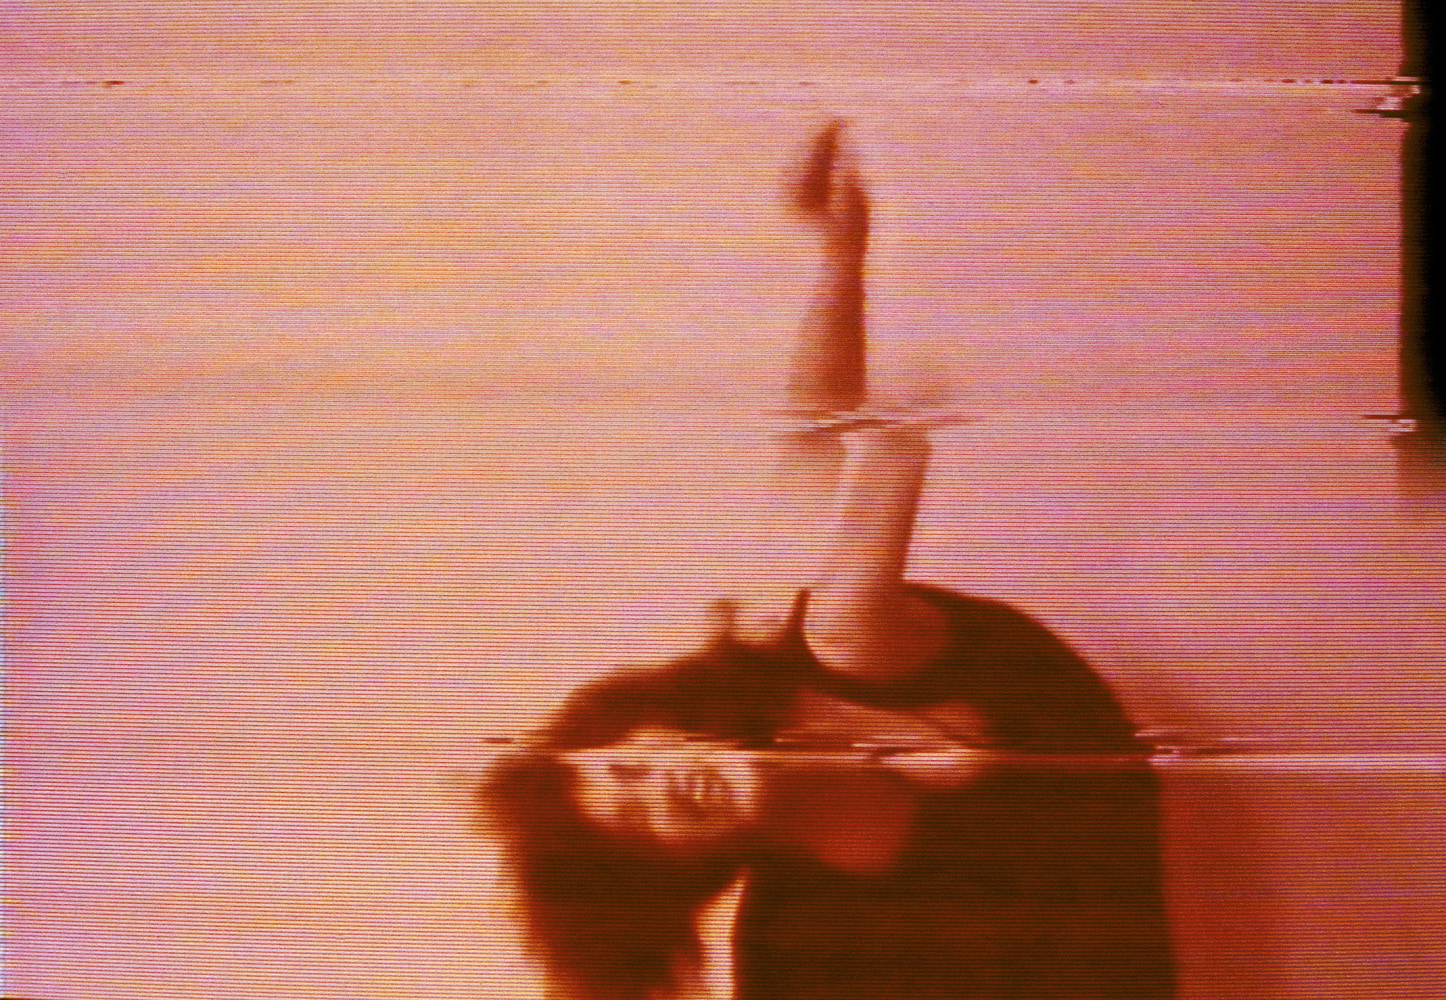 Pipilotti Rist
I&amp;#39;m Not The Girl Who Misses Much, 1986
Single-channel video, sound
Duration: 5 minutes